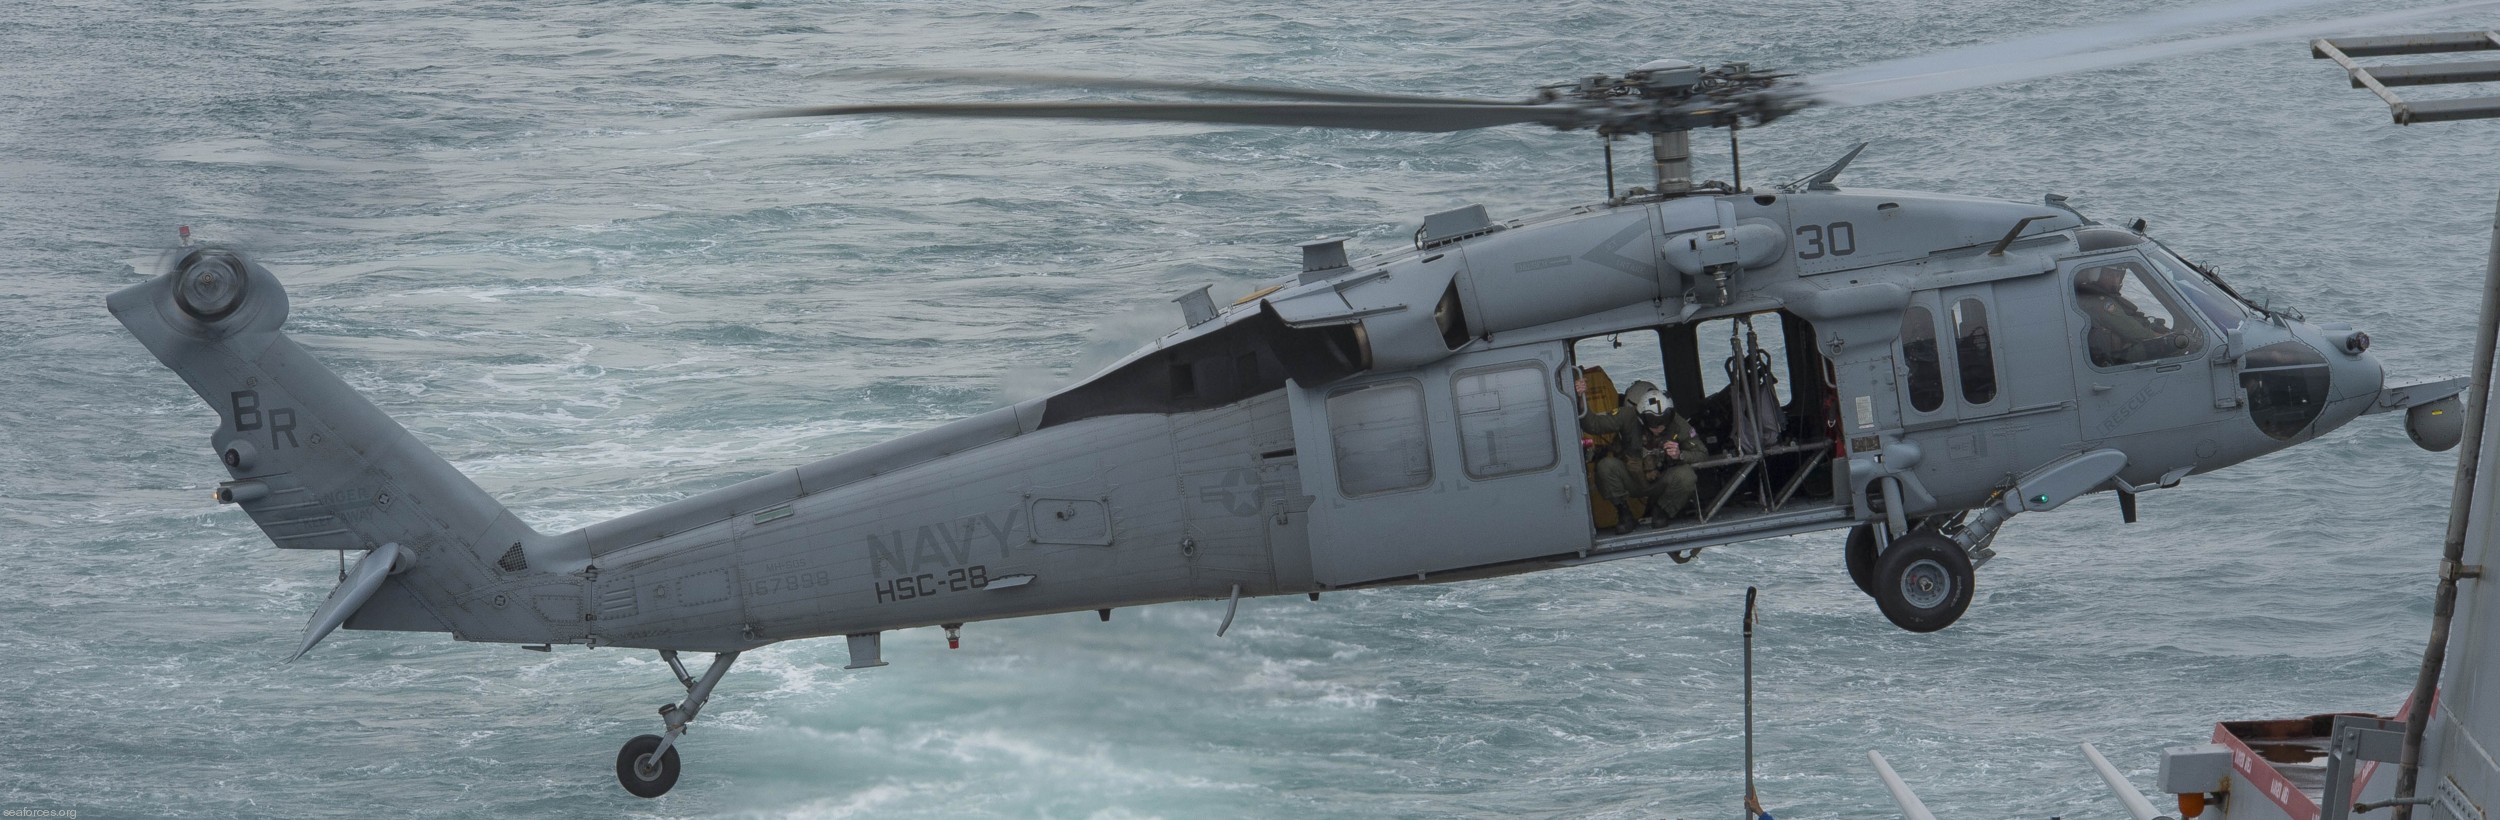 hsc-28 dragon whales helicopter sea combat squadron mh-60s seahawk us navy 79